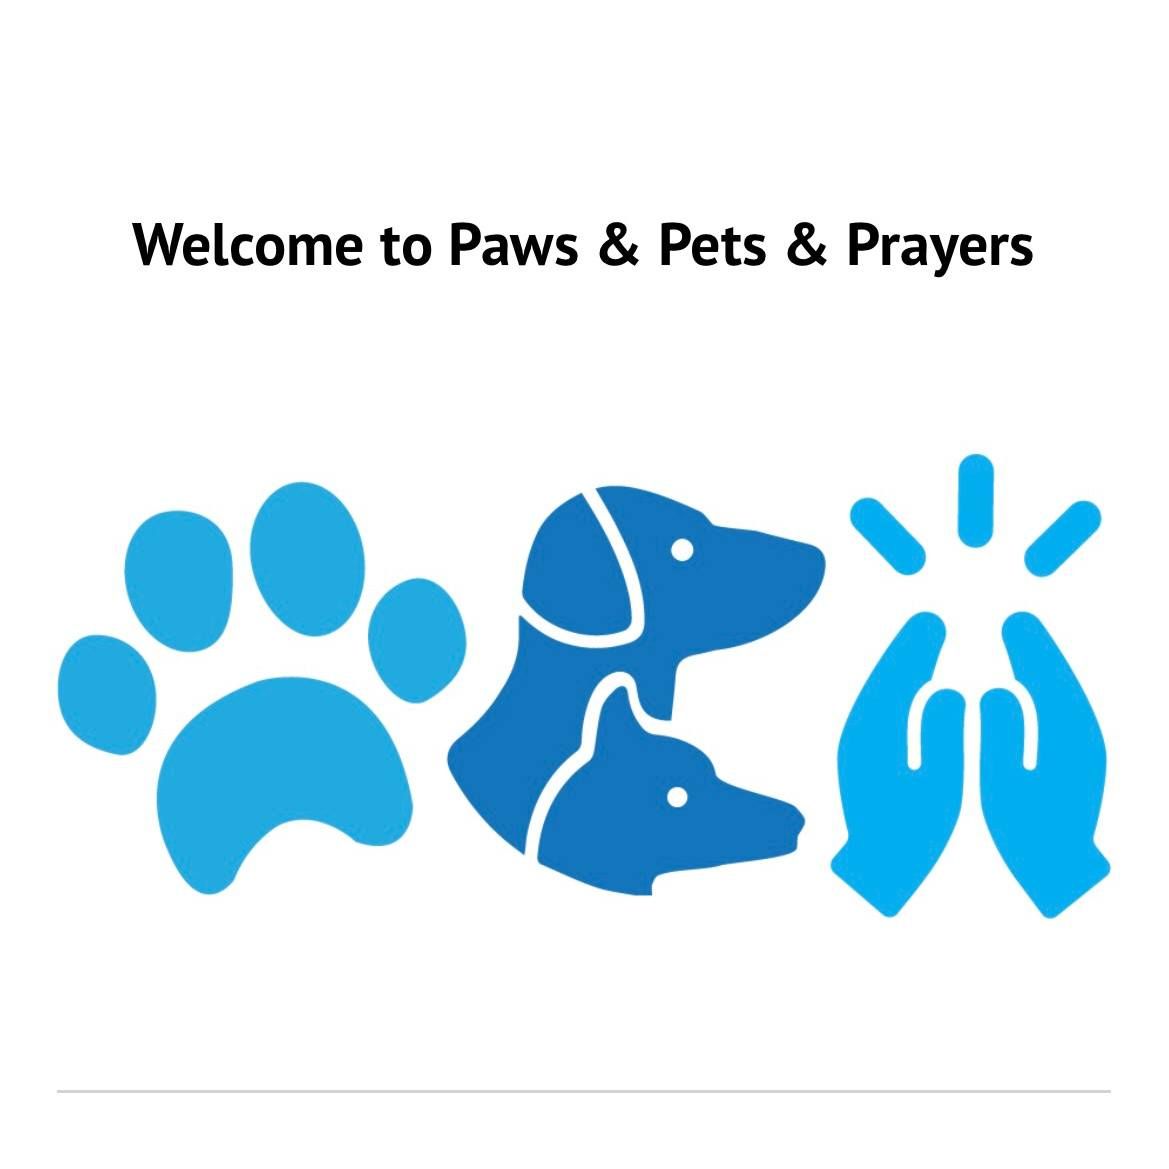 PAWS PETS PRAYERS RESCUE INC's Annual DISCO PARTY FUNDRAISER